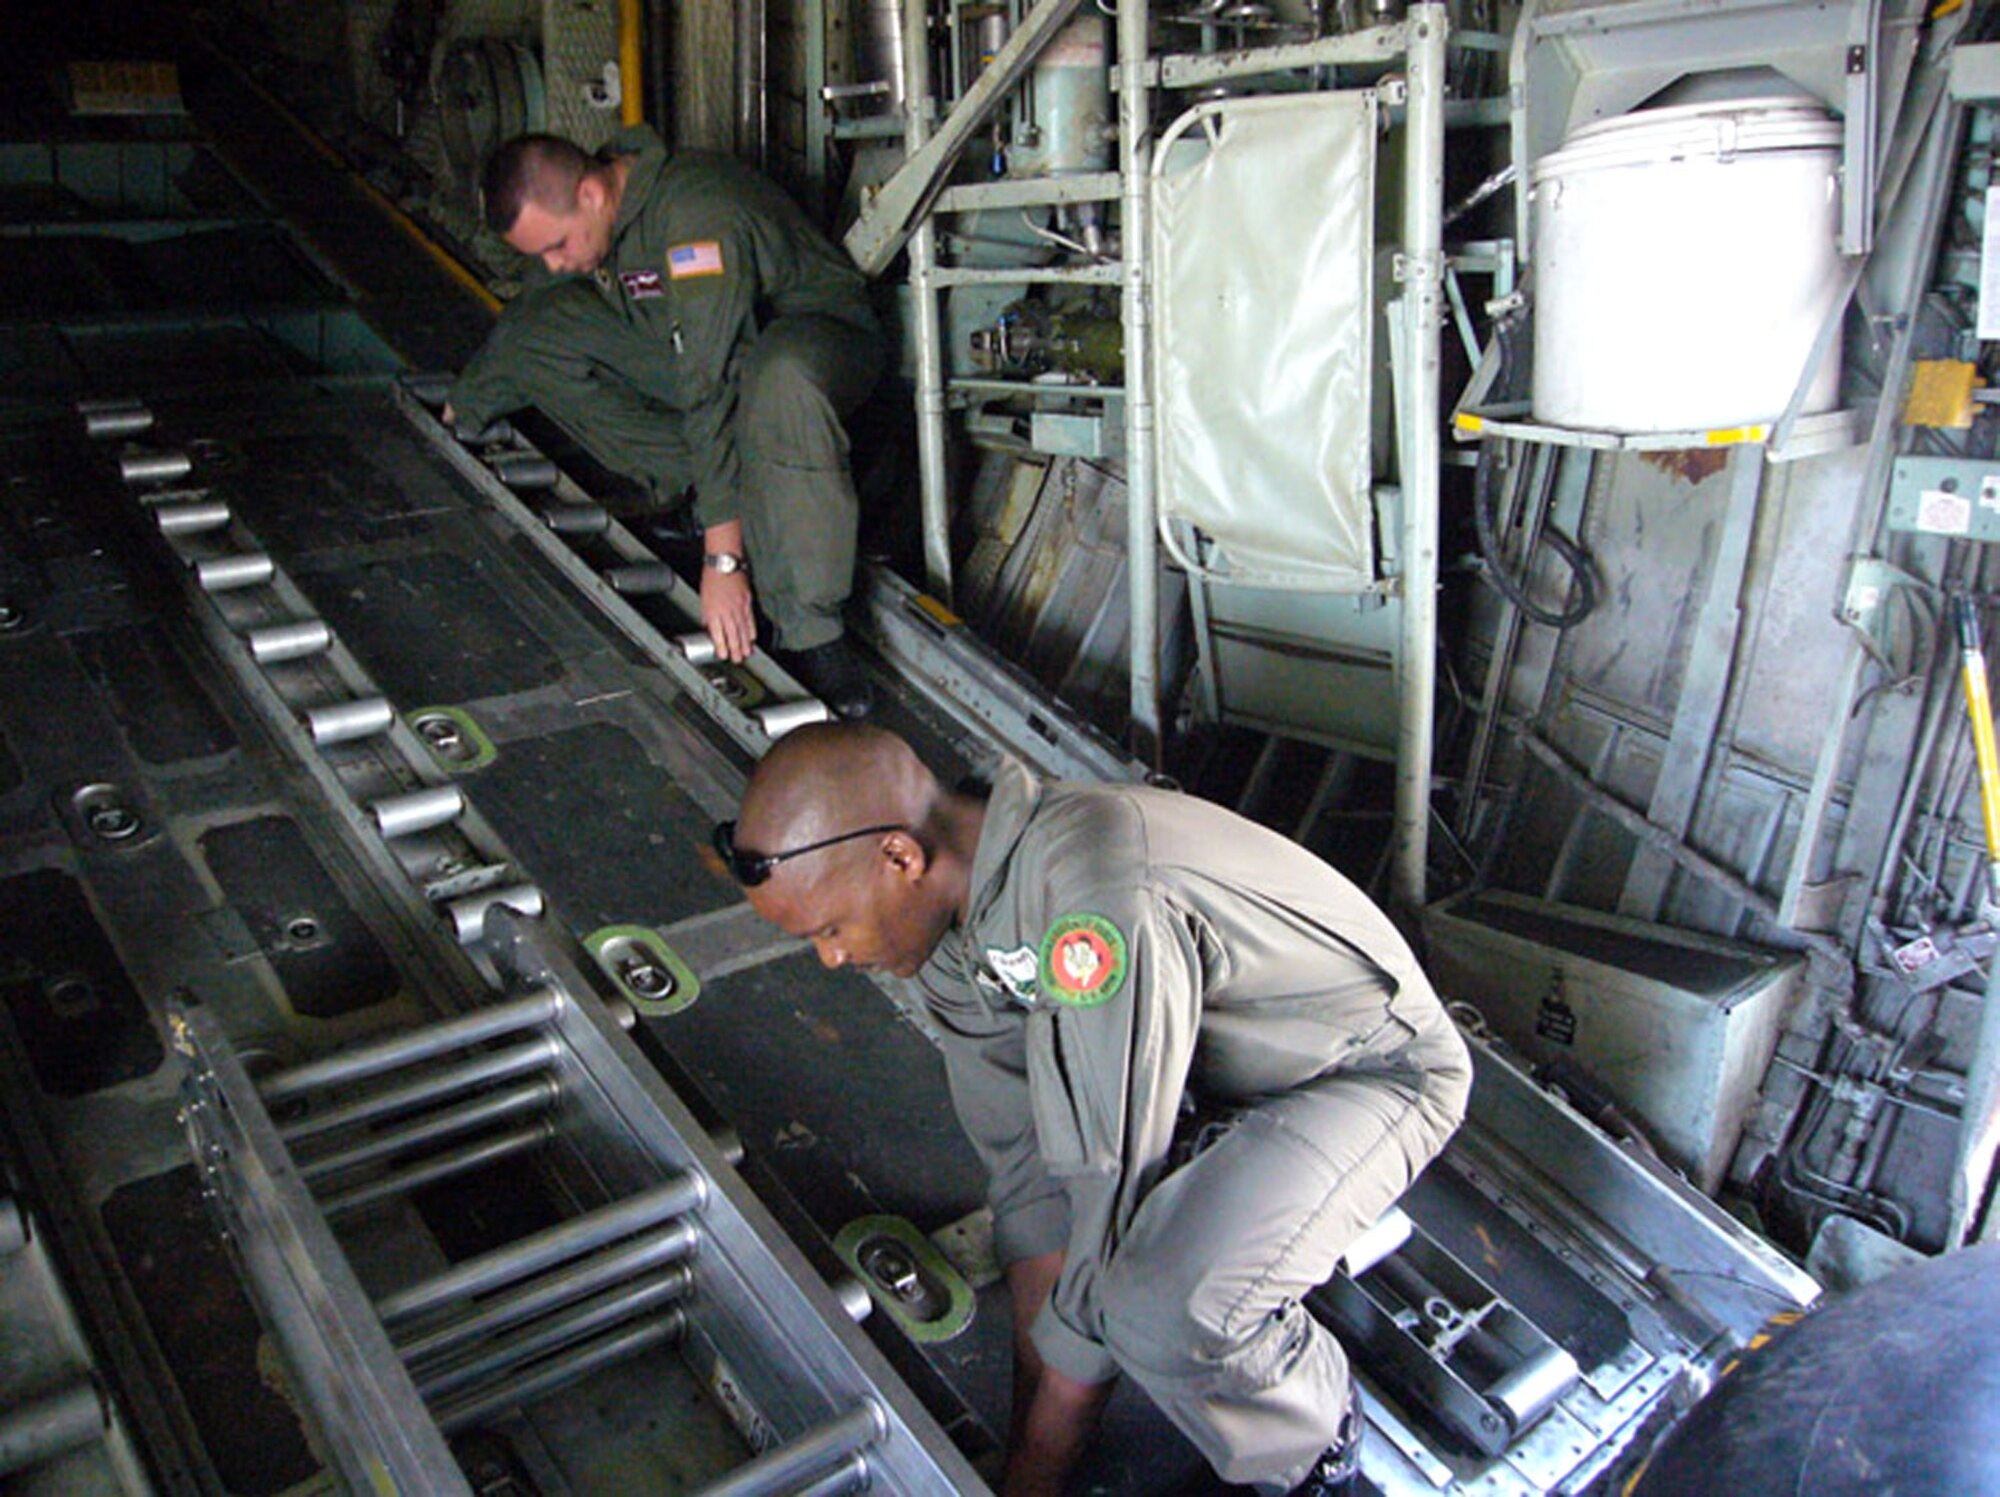 Botswana Defence Force Cpl. Ezekiel Merafe, C-130 loadmaster, and Air Force Staff Sgt. Vern Miles, 86th Operations Support Squadron C-130 loadmaster, prepare the back of a C-130 for cargo Sept. 24 at the Kigali International Airport in Rwanda. (U.S. Air Force photo/Capt. Erin Dorrance)

